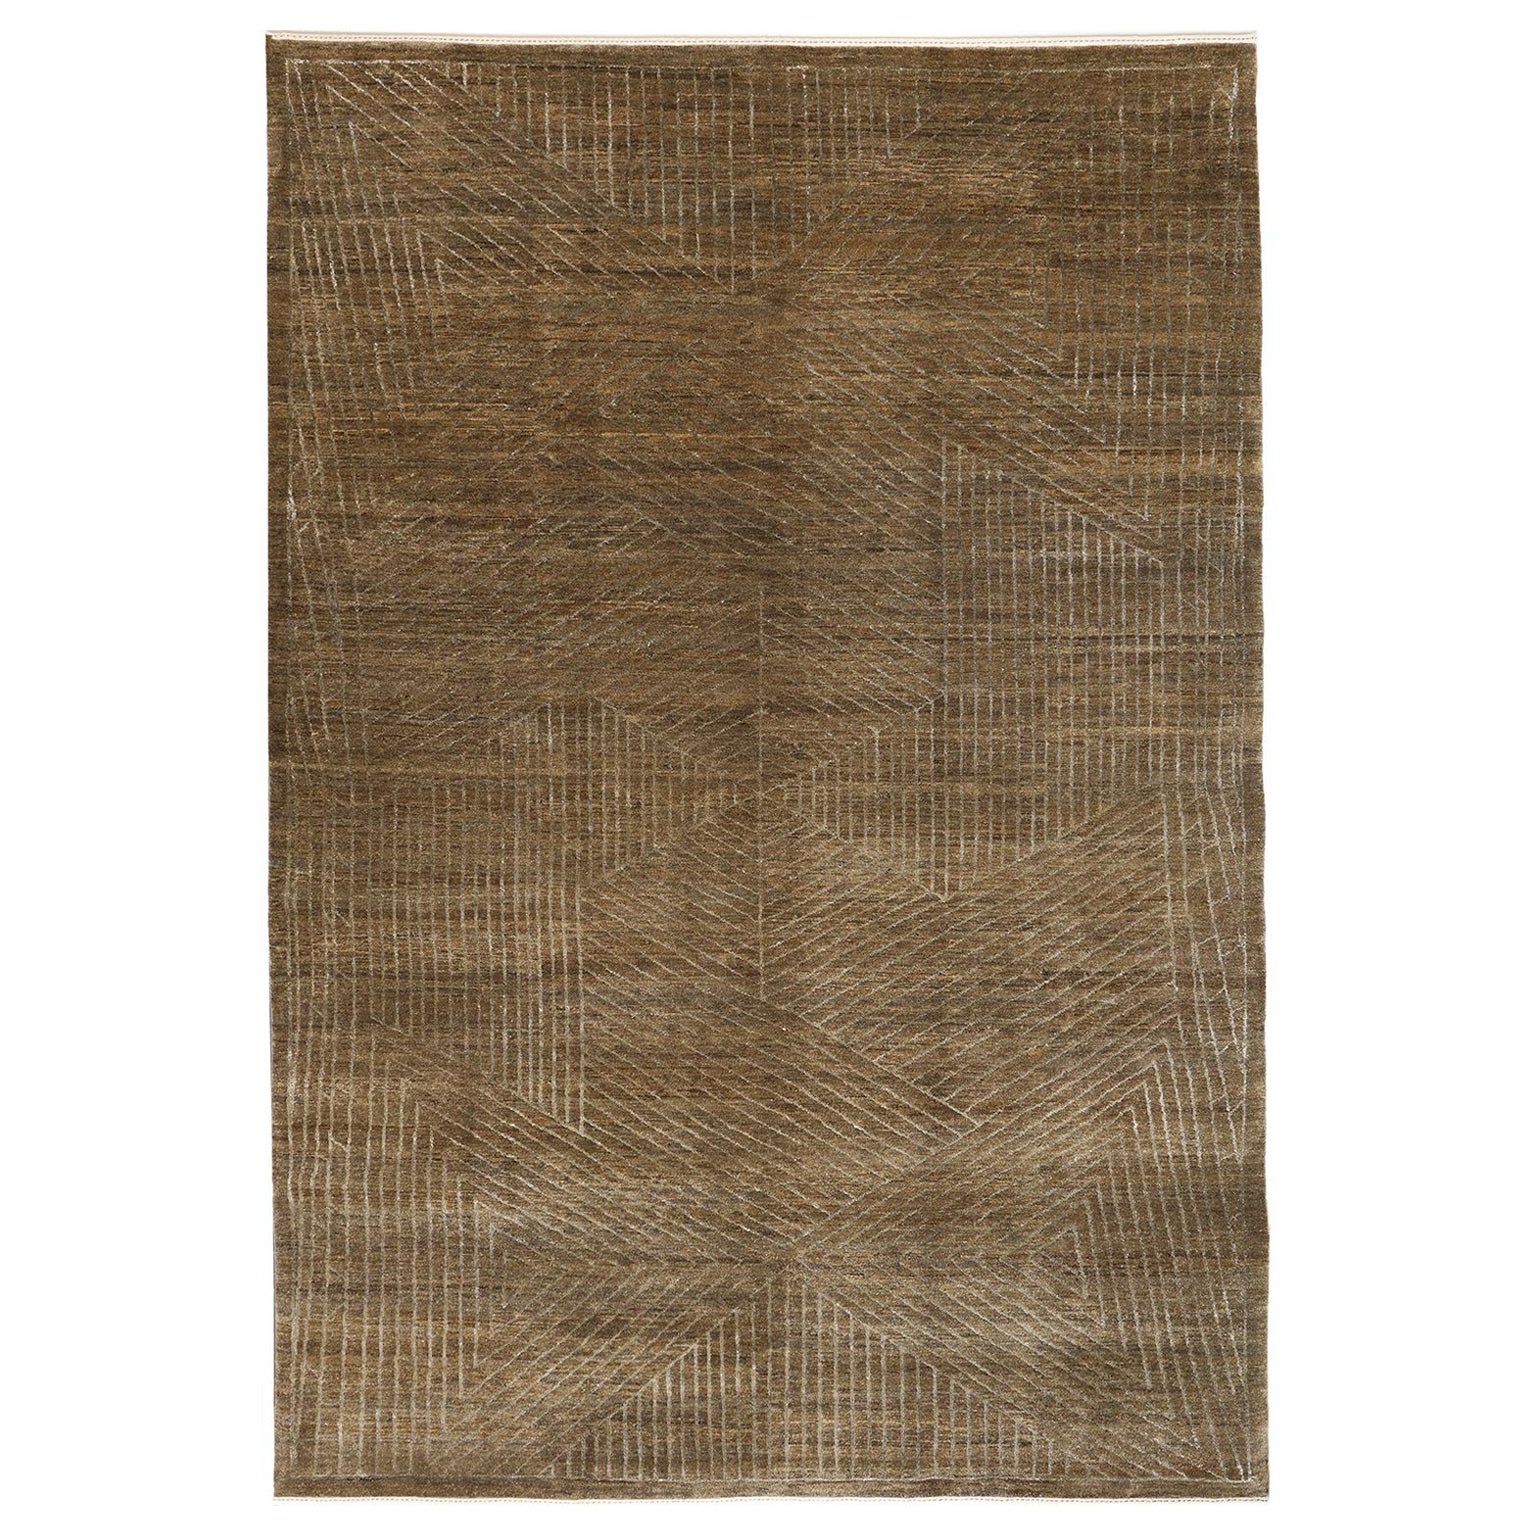 Orley Shabahang "Khesht" Contemporary Persian Rug, Wolle und Seide, Brown, 6' x 9'